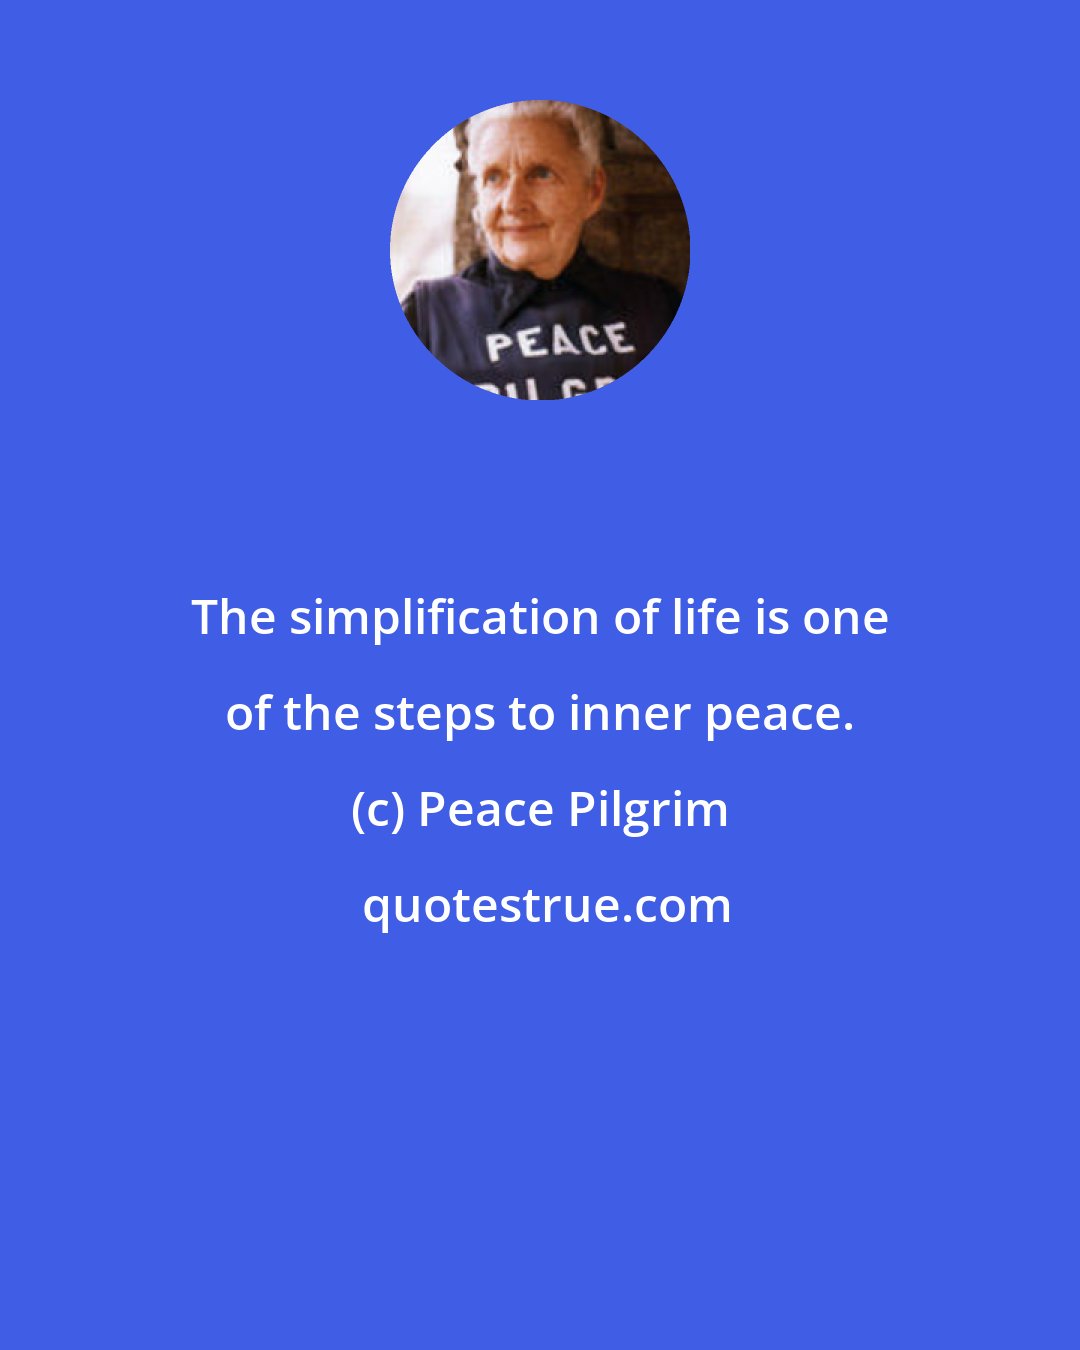 Peace Pilgrim: The simplification of life is one of the steps to inner peace.